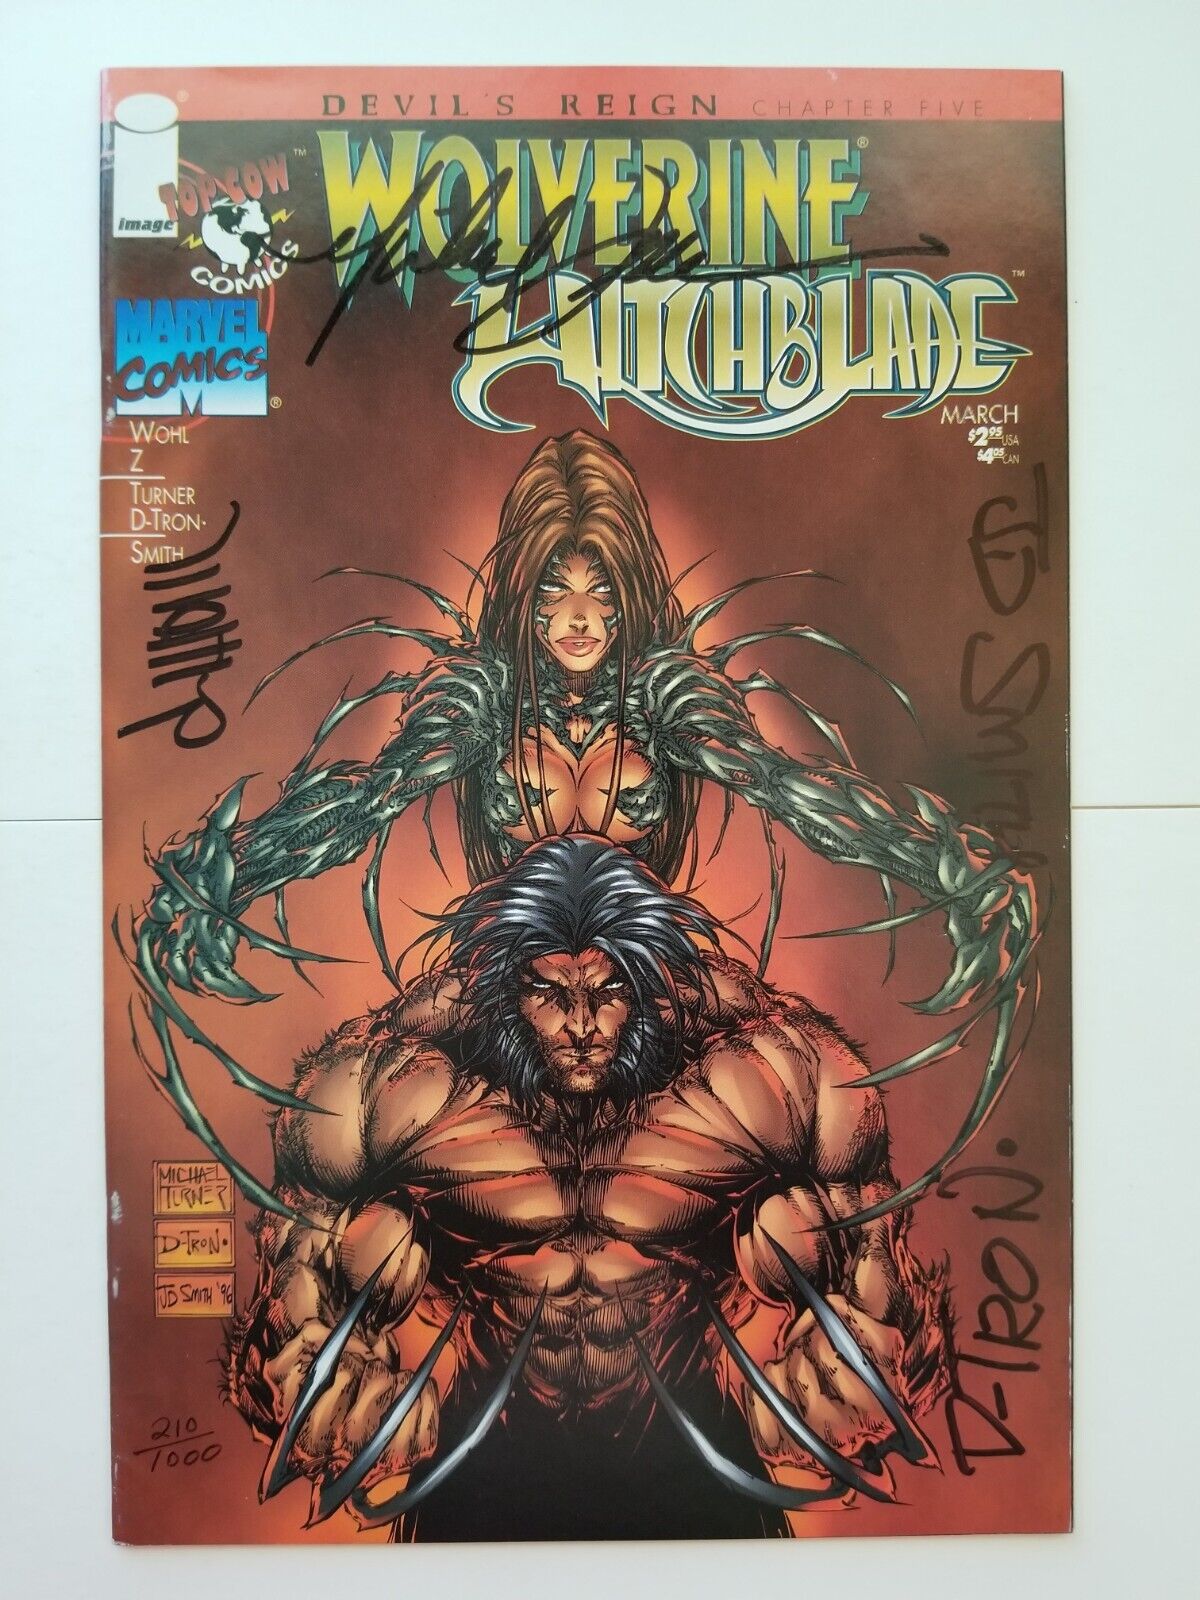 Wolverine / Witchblade #1 signed (Image / Top Cow) Wohl, Turner, D-Tron, Smith